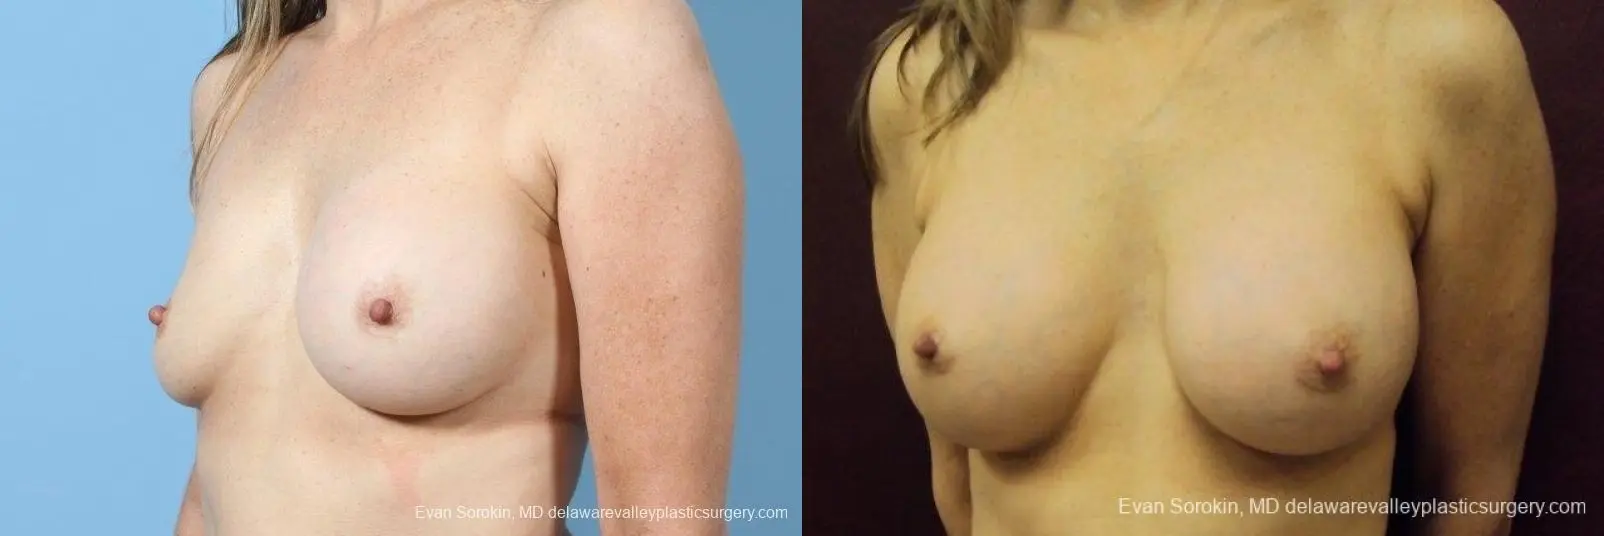 Philadelphia Breast Augmentation 8708 - Before and After 3